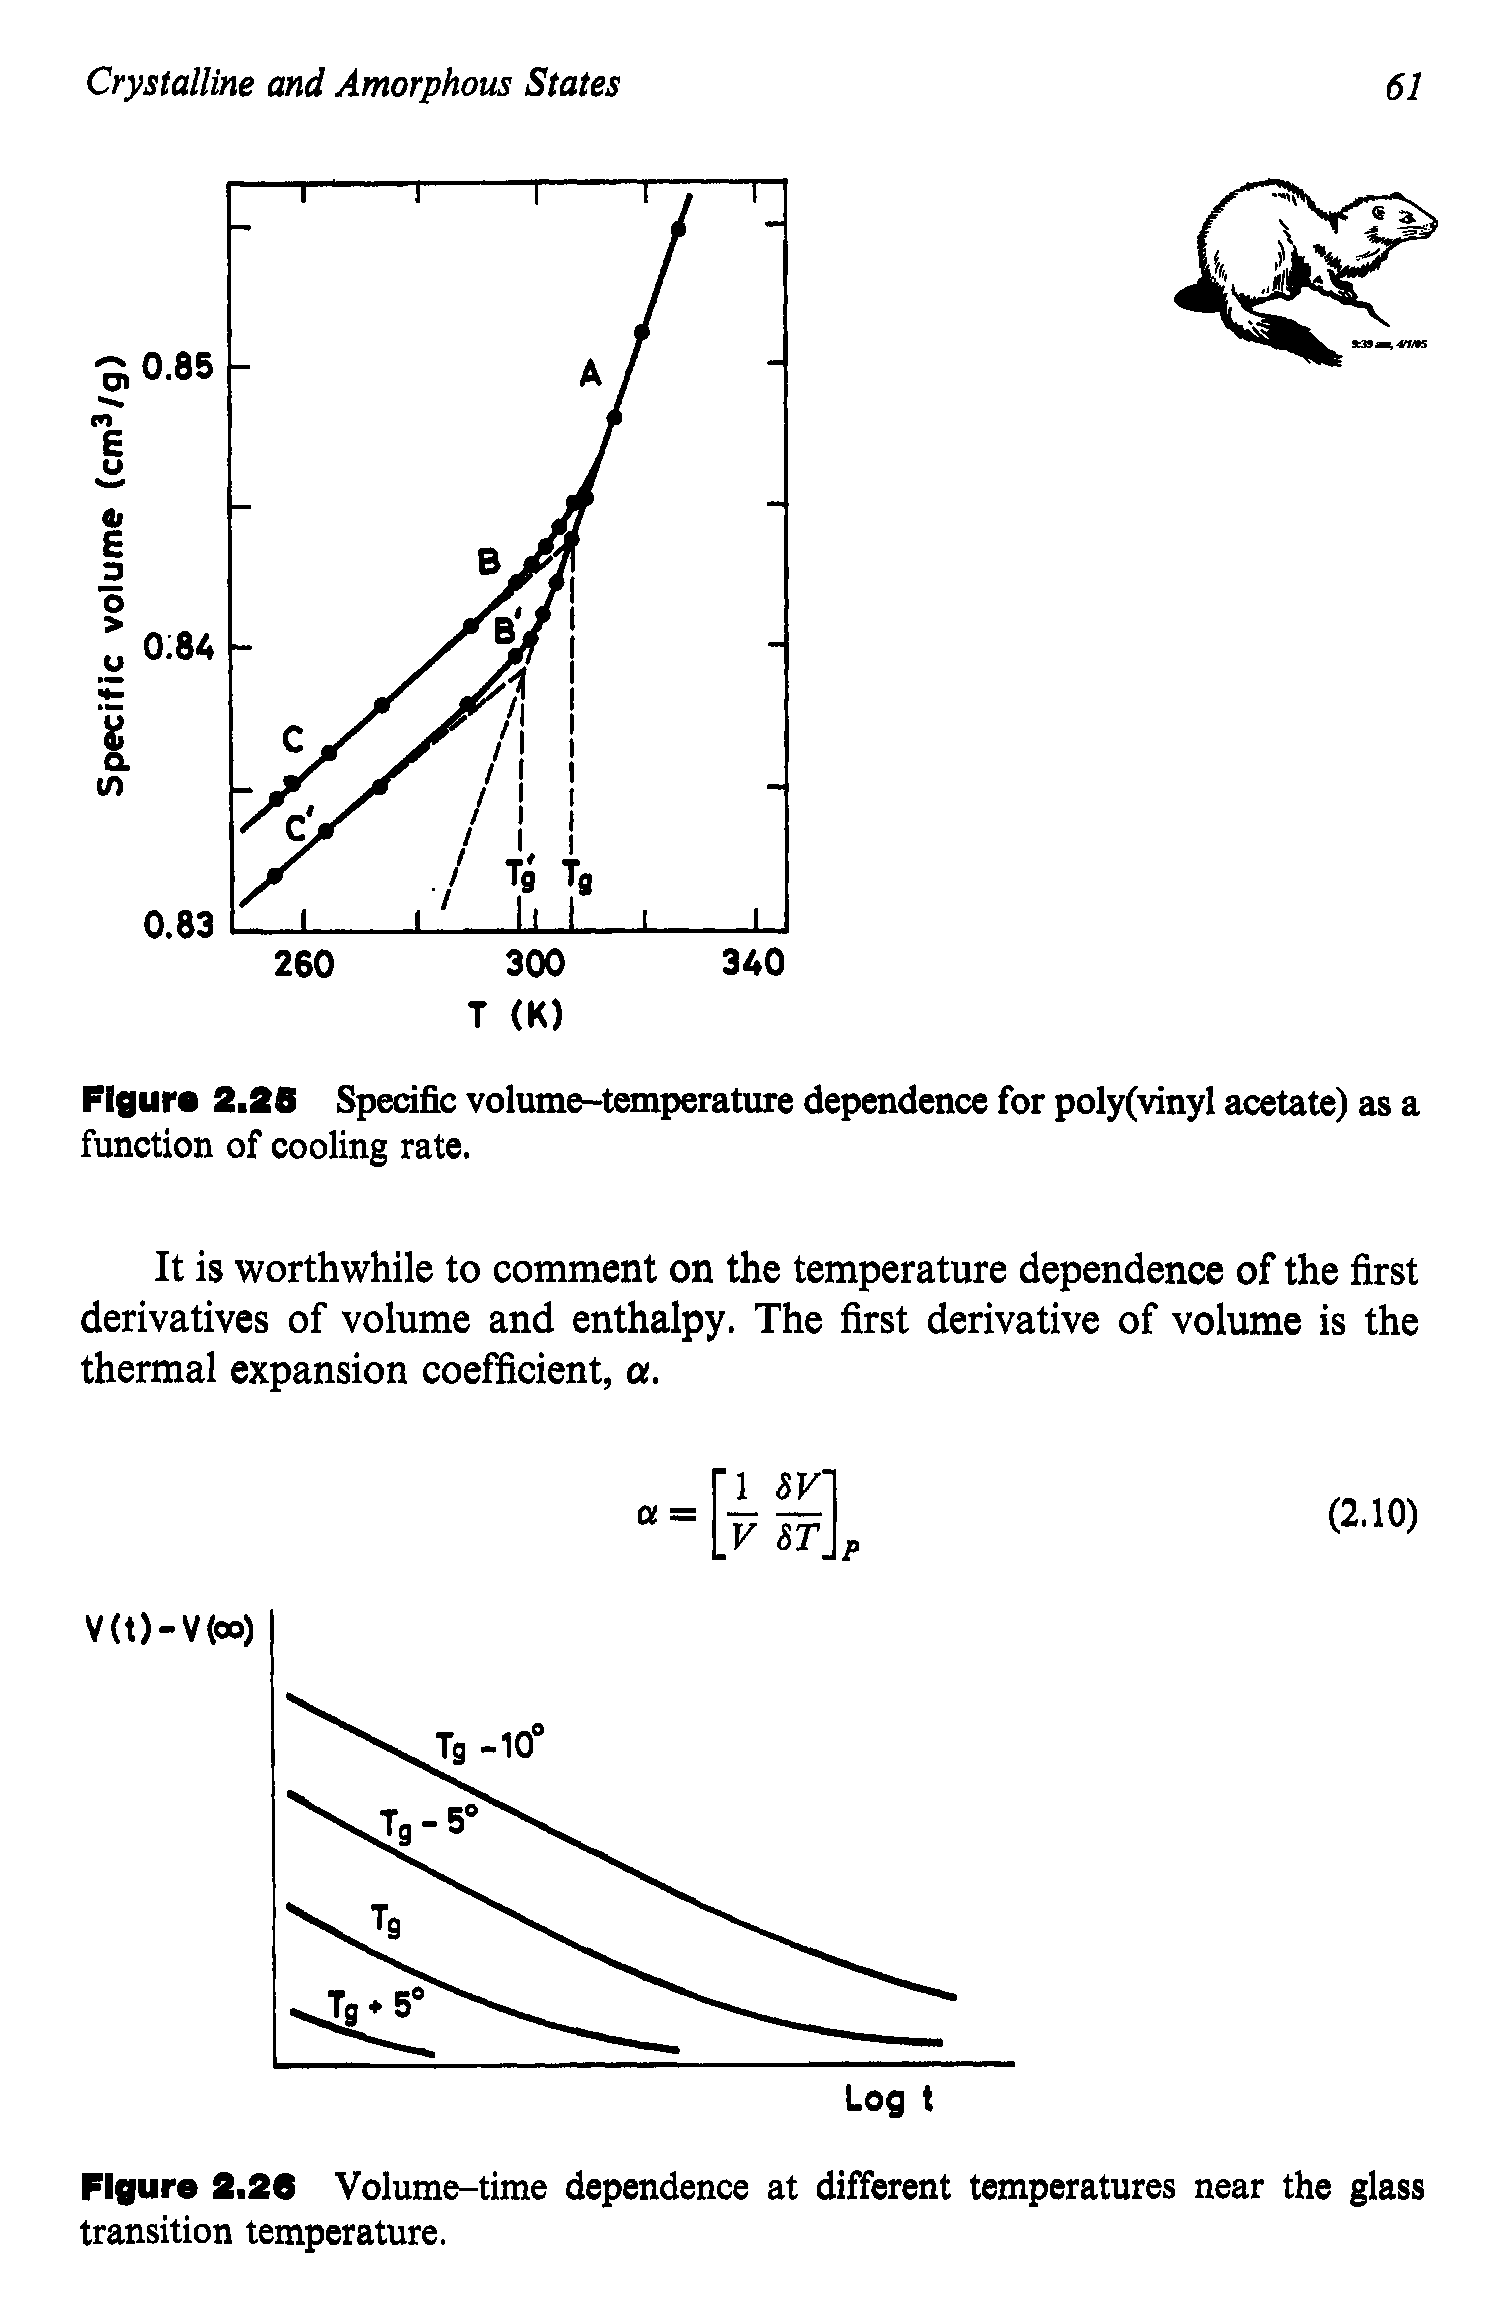 Figure 2.26 Specific volume-temperature dependence for poly(vinyl acetate) as a function of cooling rate.